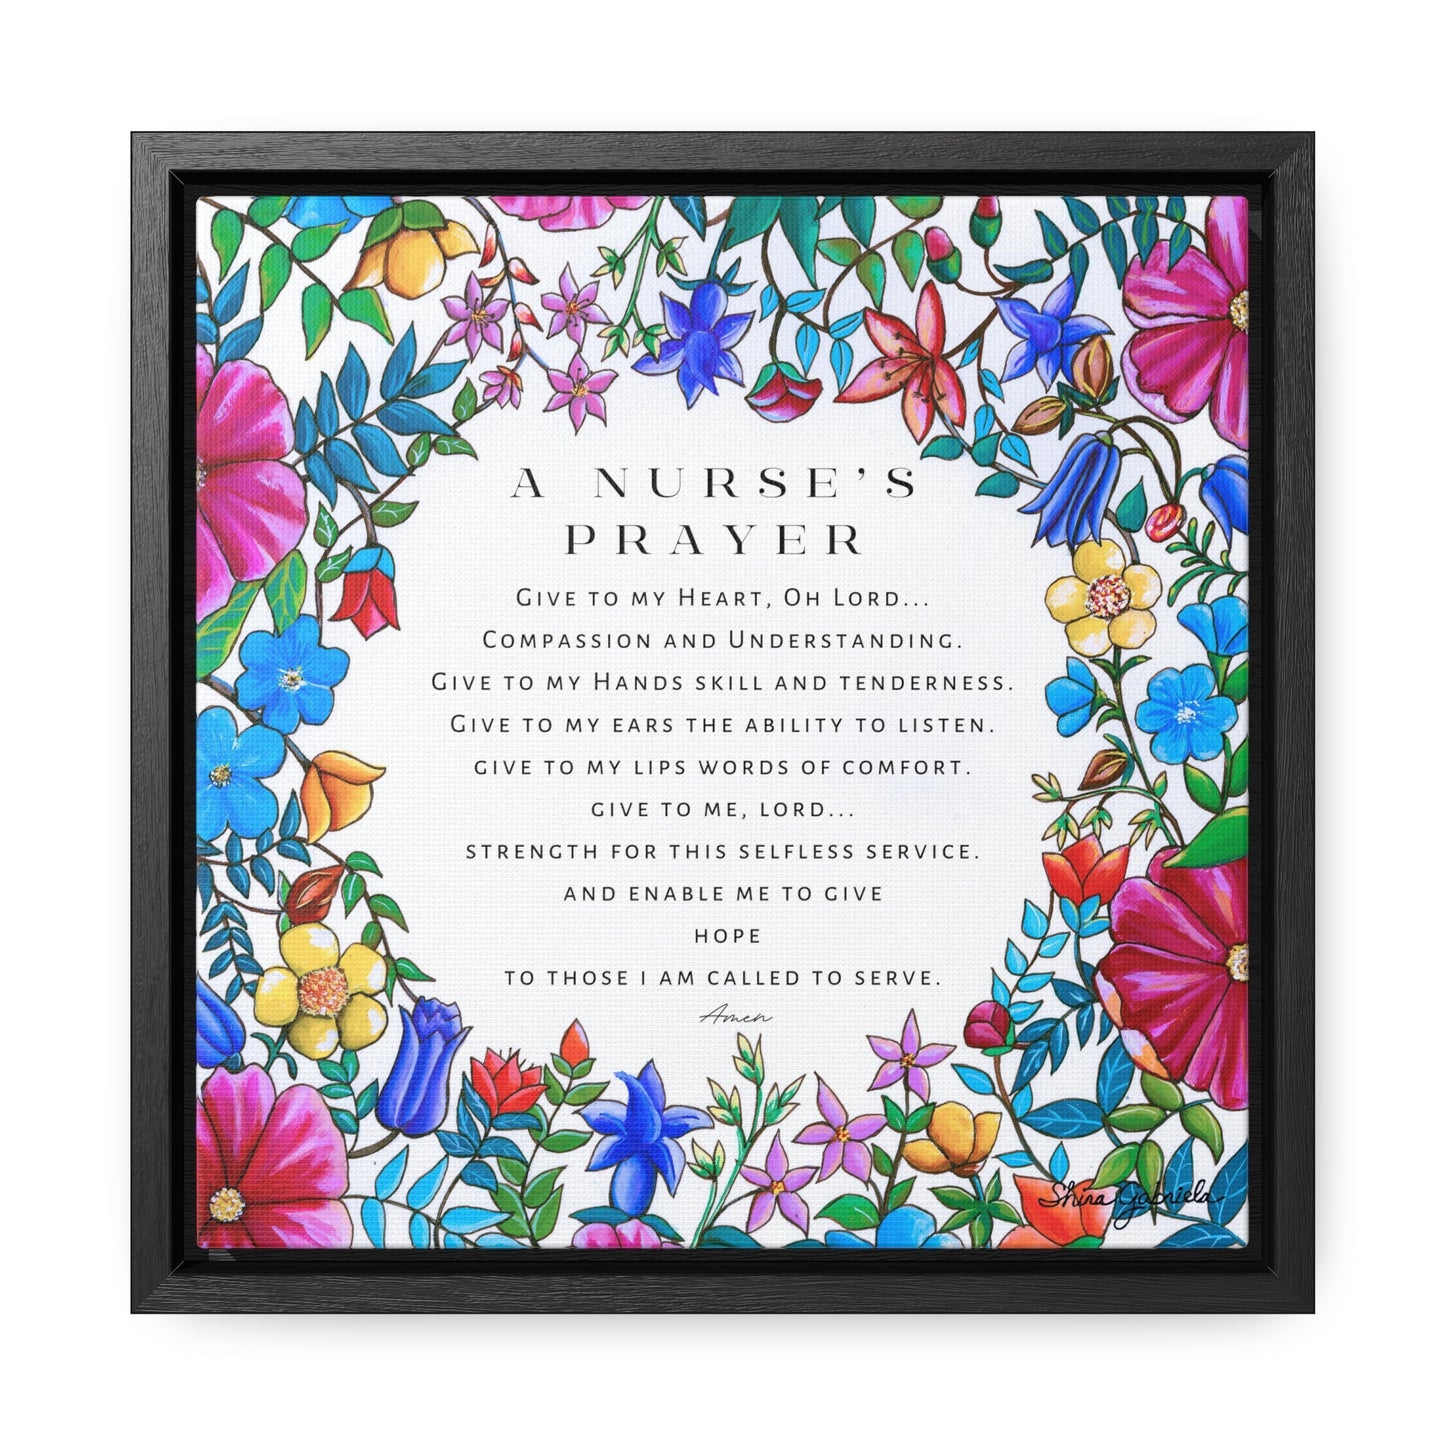 A Nurse's Prayer by Shira Gabriela Gallery Wrapped Canvas in Square Frame